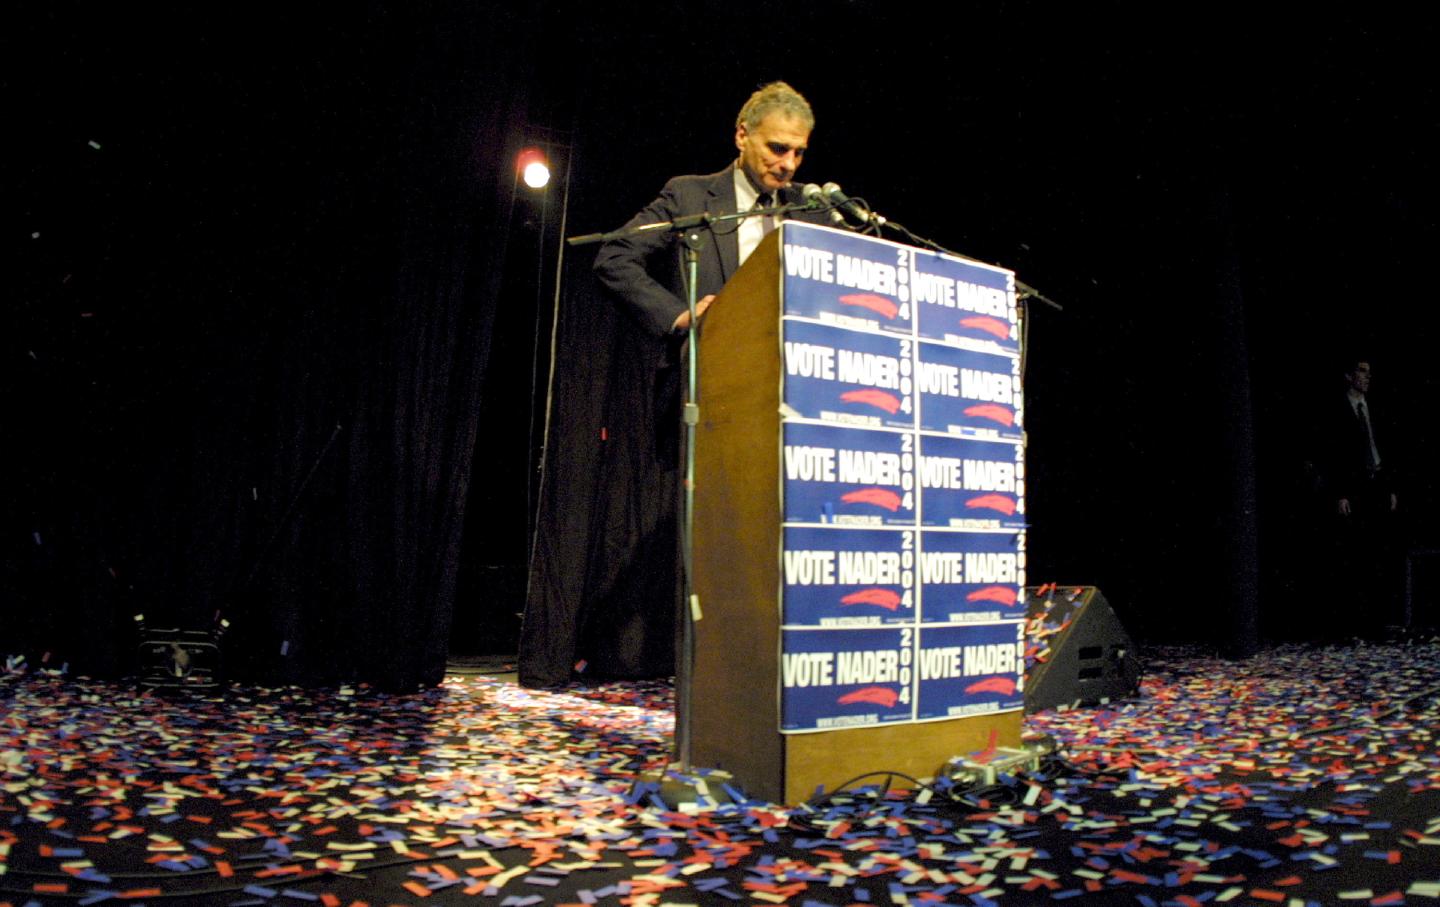 Ralph Nader stands onstage at a campaign event in 2004